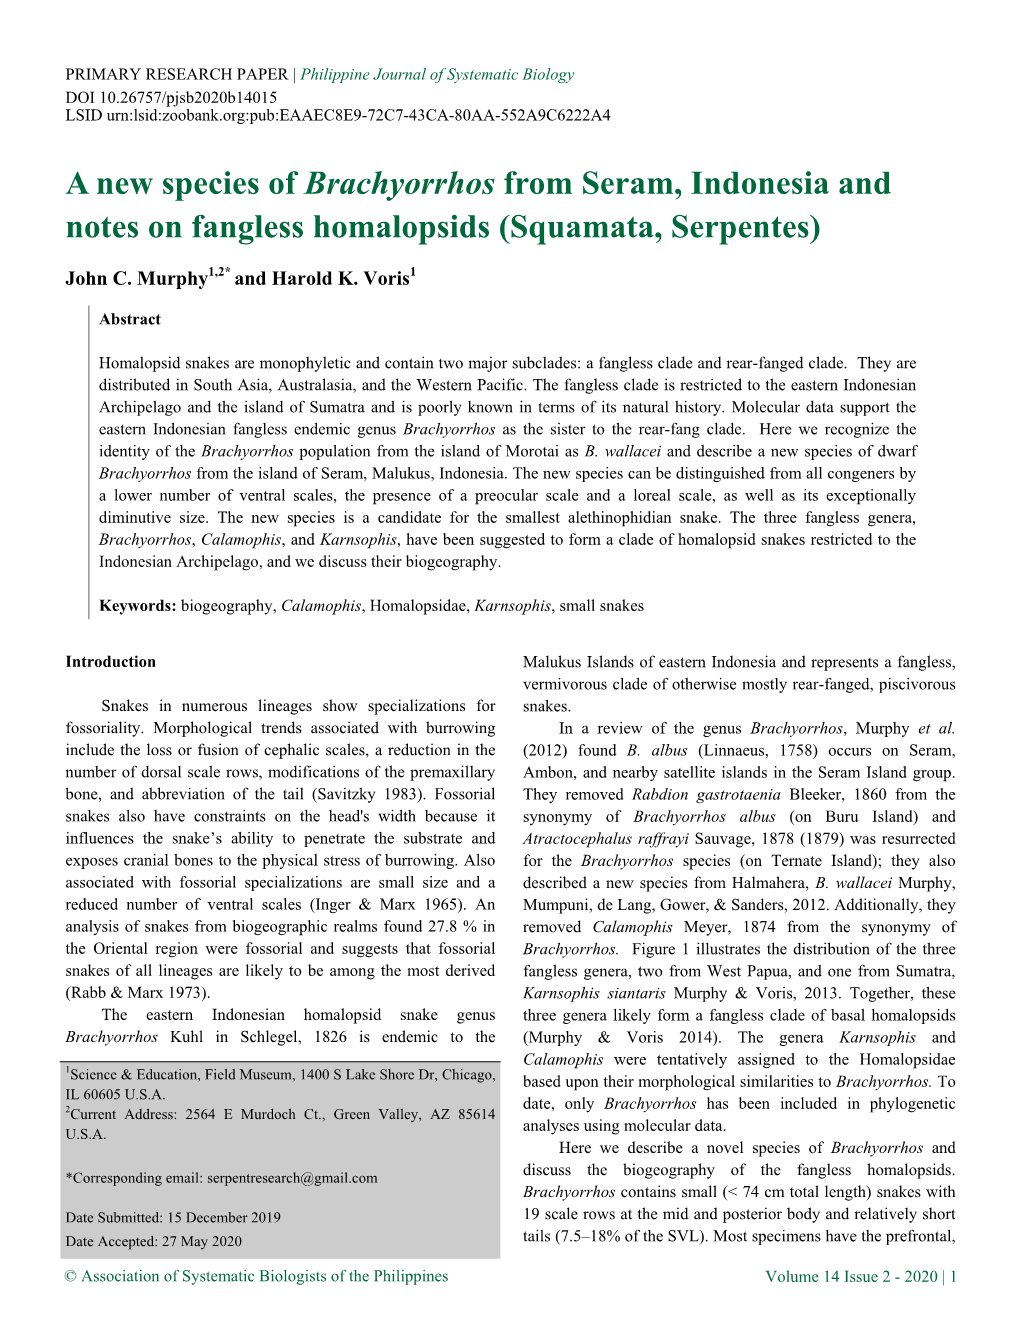 A New Species of Brachyorrhos from Seram, Indonesia and Notes on Fangless Homalopsids (Squamata, Serpentes)